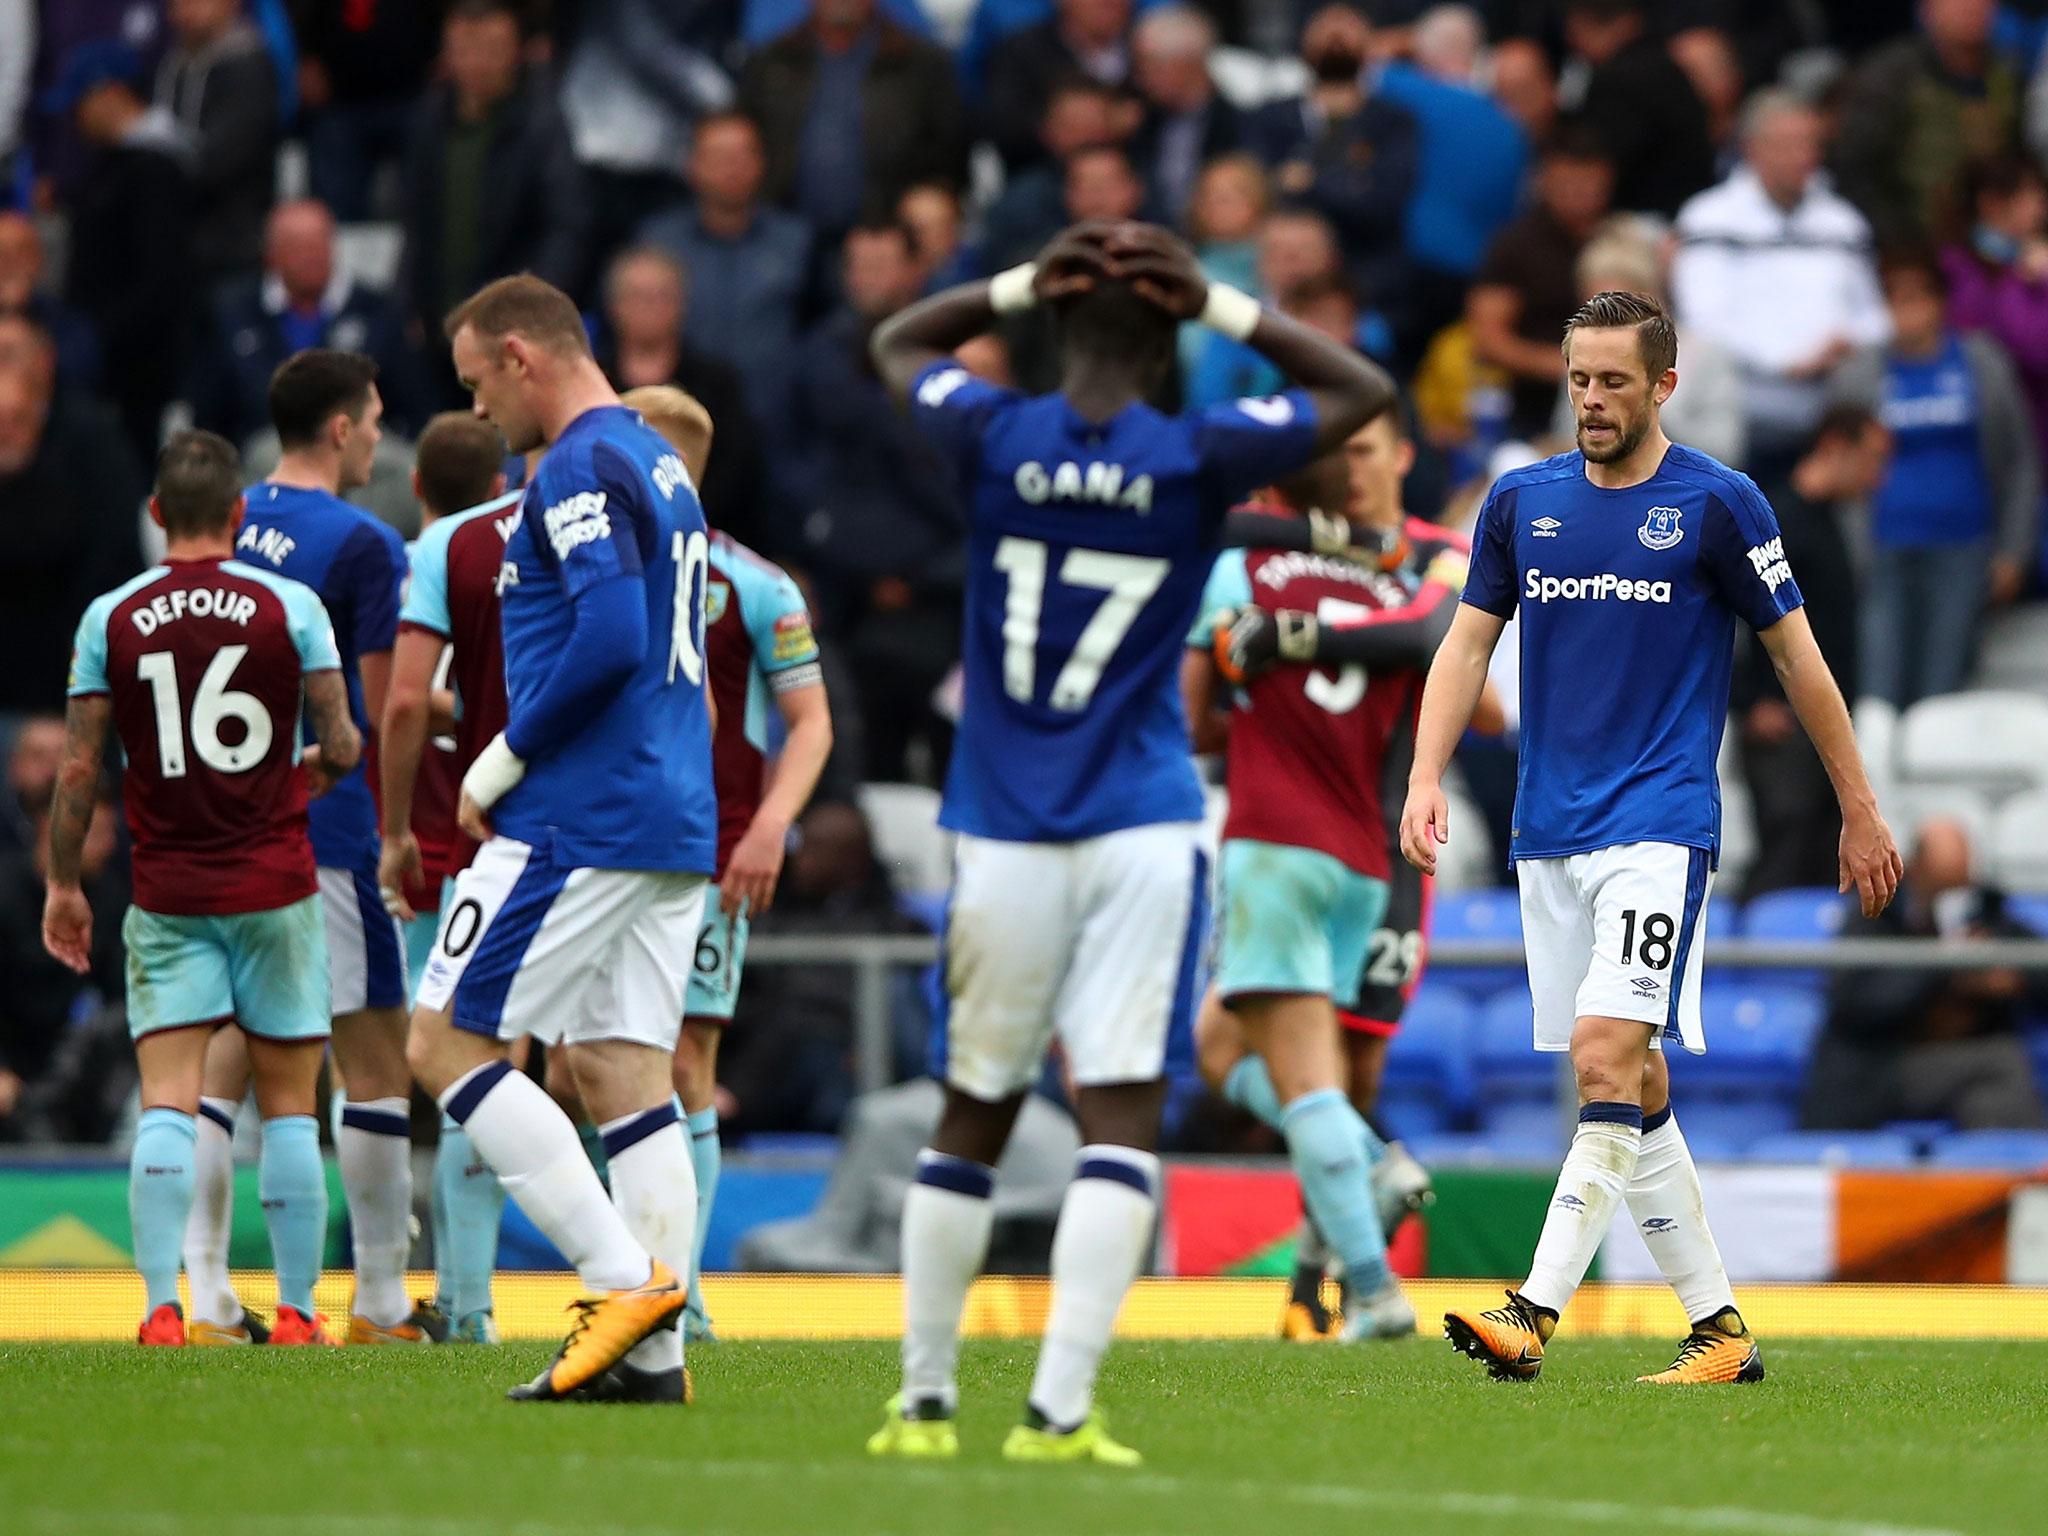 Everton have found themselves struggling for form and results this season